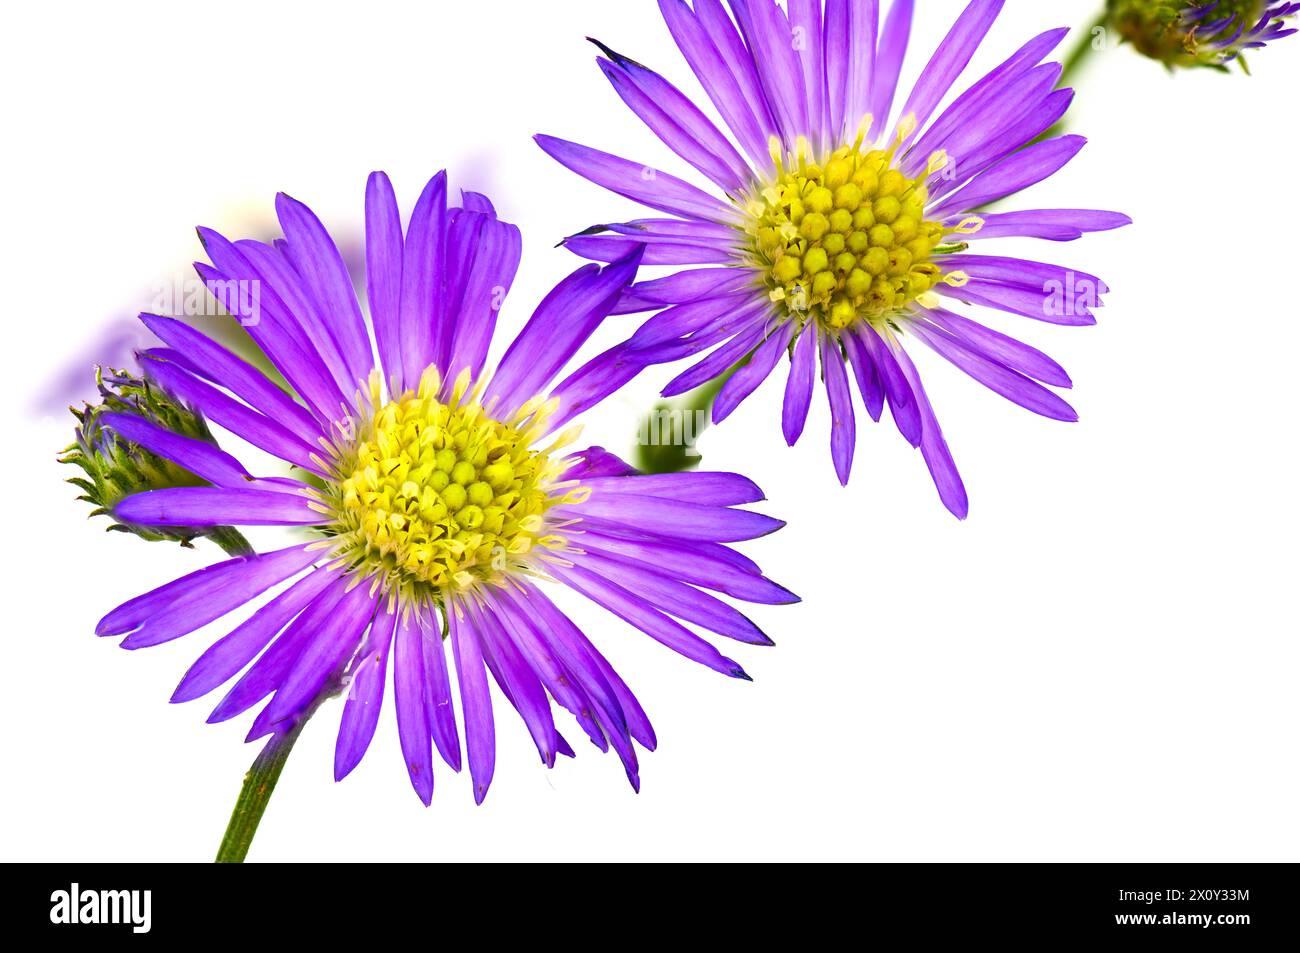 A focus stacked image of two michaelmas daisies (aster monch) against a white background Stock Photo